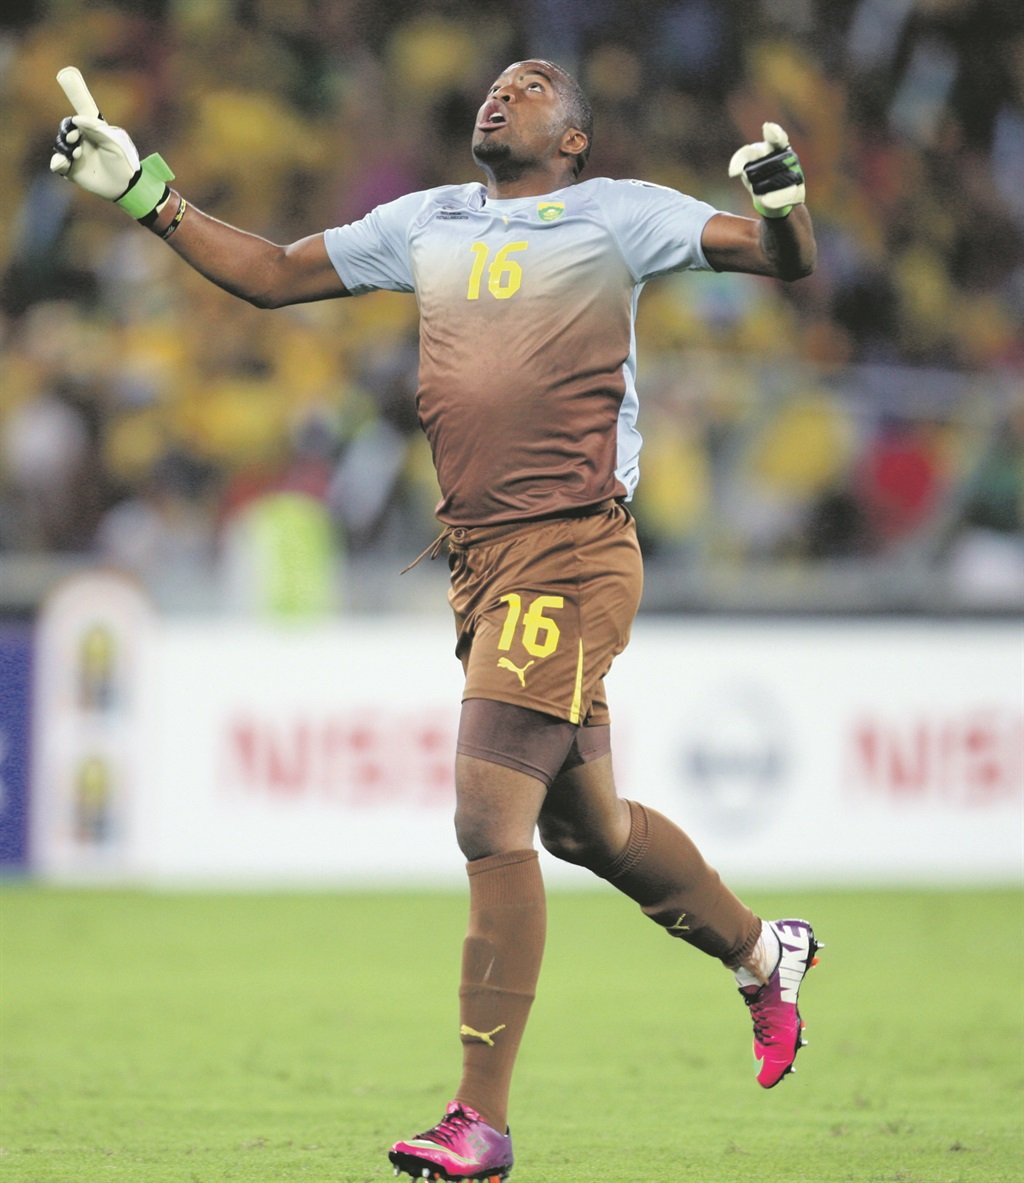 Itumeleng Khune is expected to be in goals. Picture: Steve Haag / Getty Images  